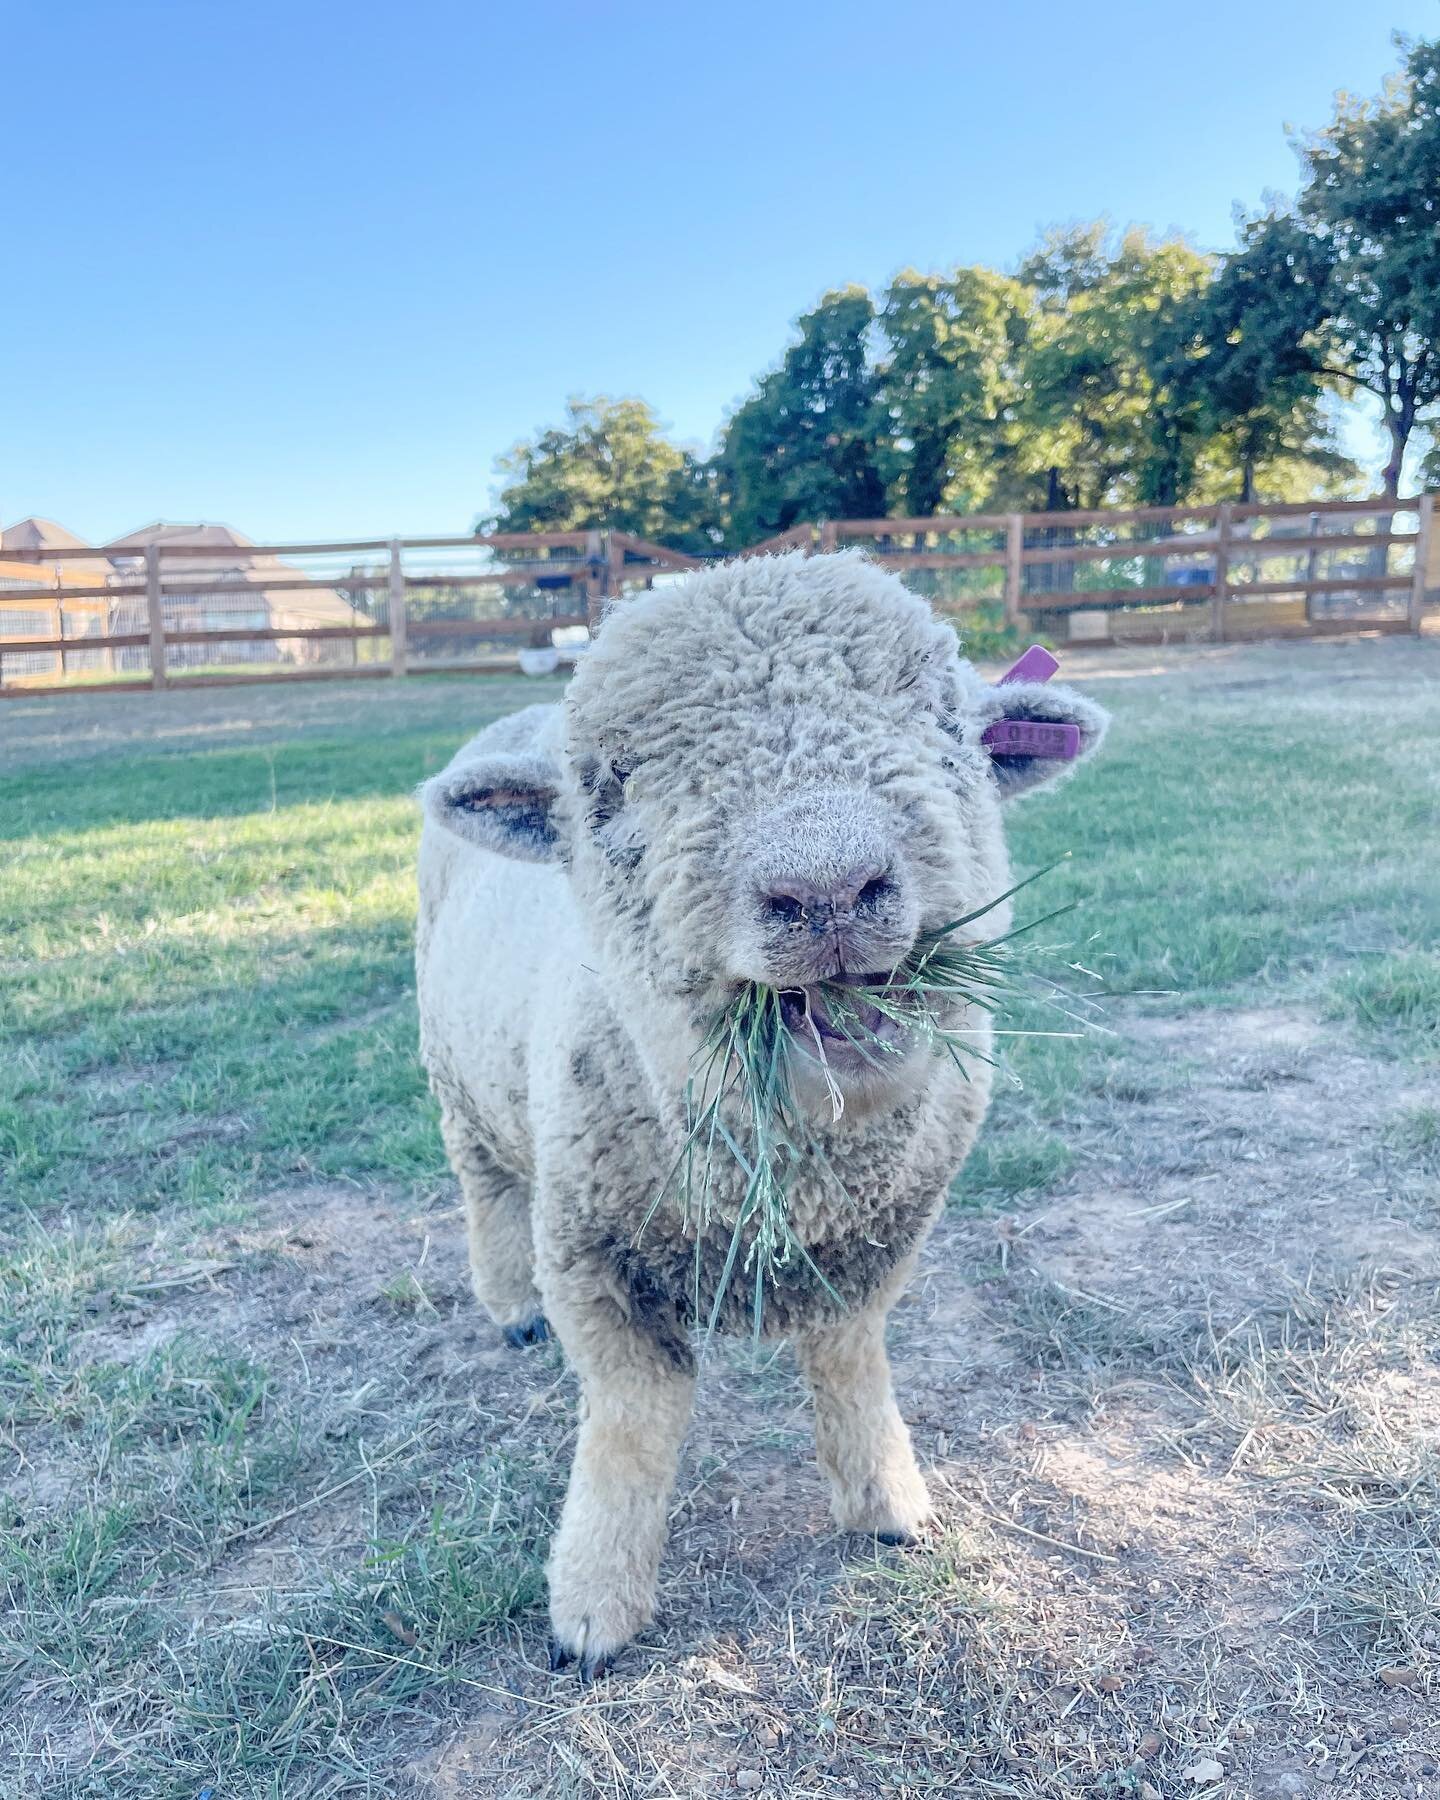 Winston wants you to #meetusatthebarn THIS Thursday, October 6th from 4-8pm for Pinewood Market!! 
.
.
.
.
.
#pinewood #pinewoodmarket